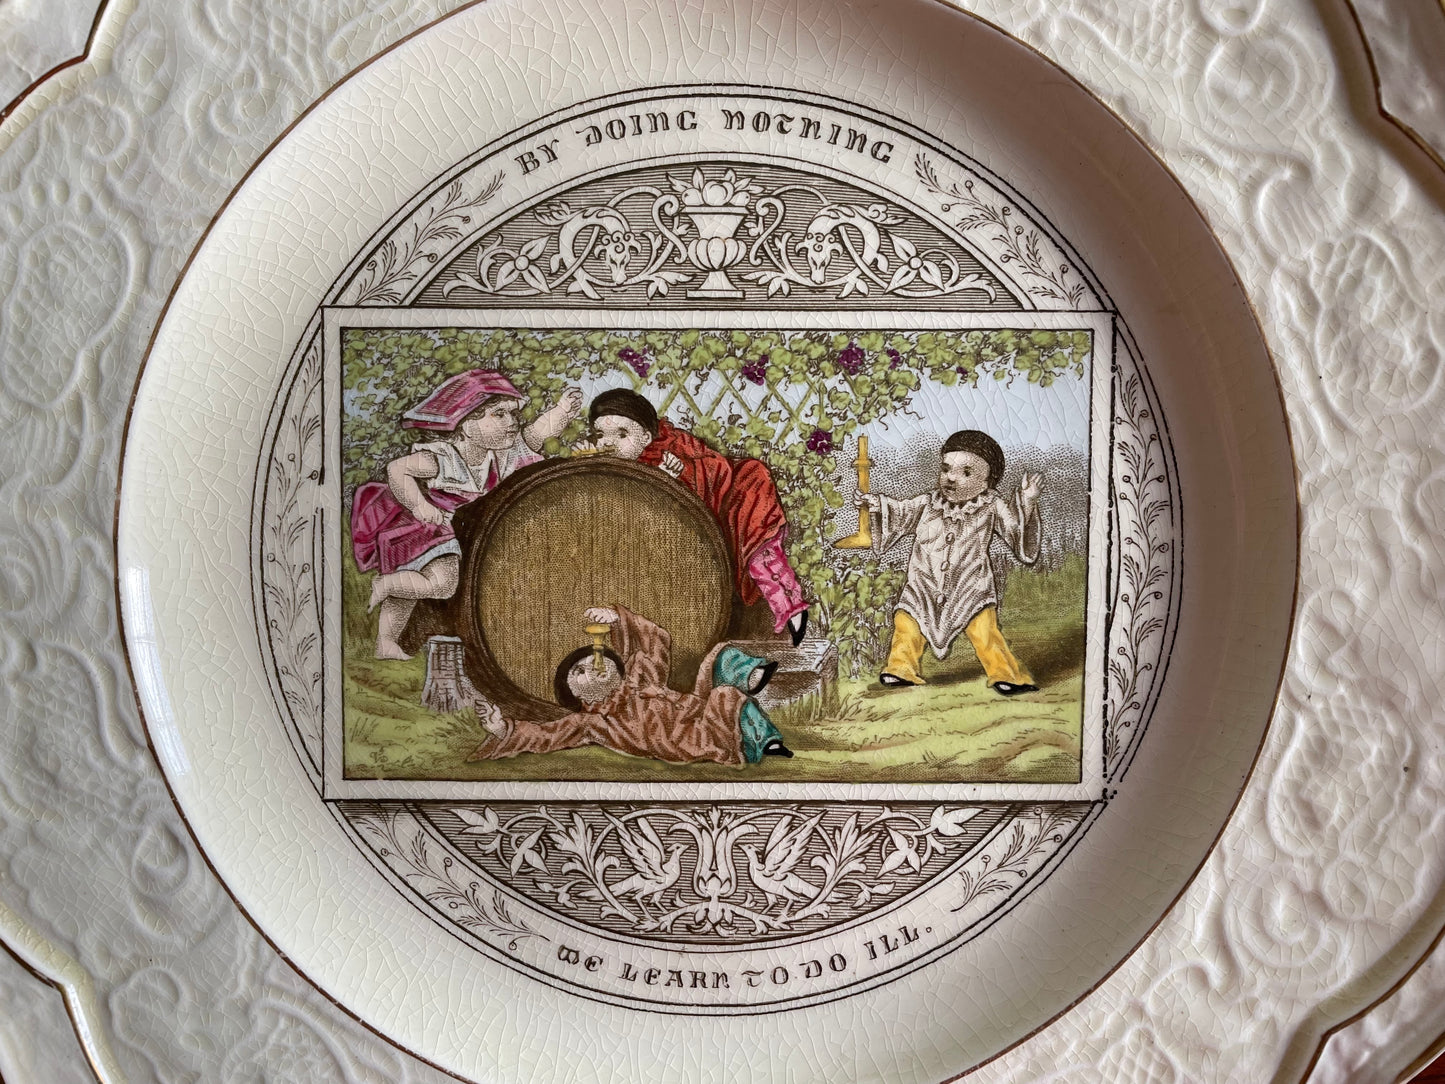 Wedgwood "Gastronomic Homilies" Card Motto Series Plate c. 1877 - "By doing nothing we learn to do ill."